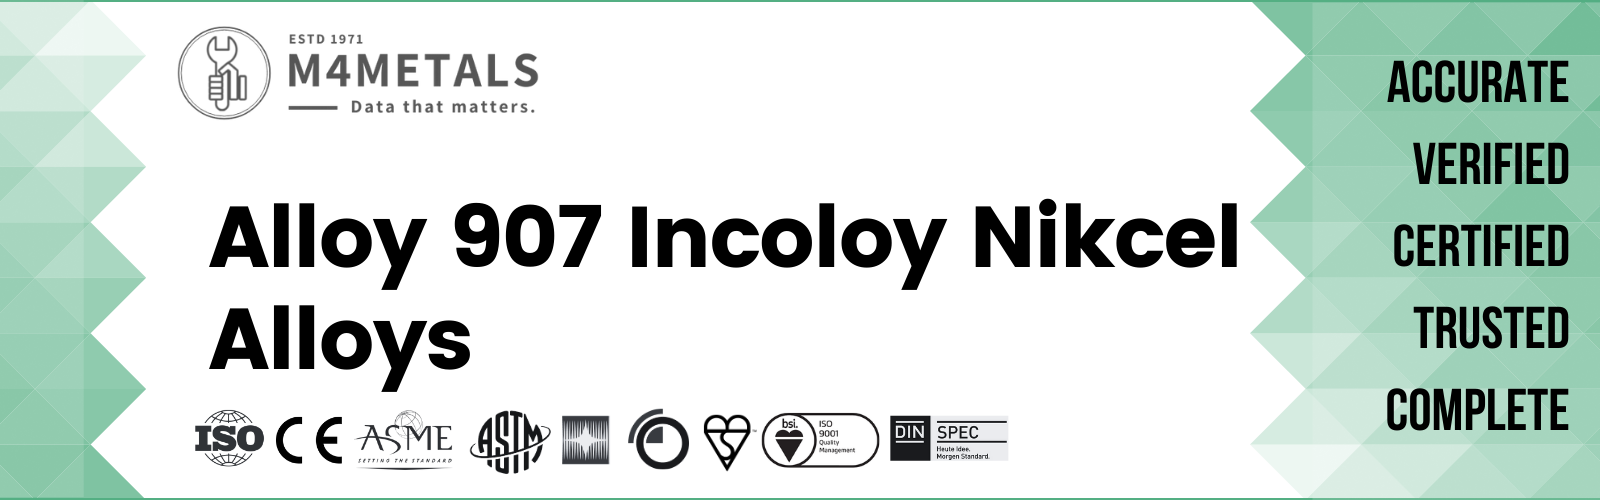 Incoloy Alloy 907